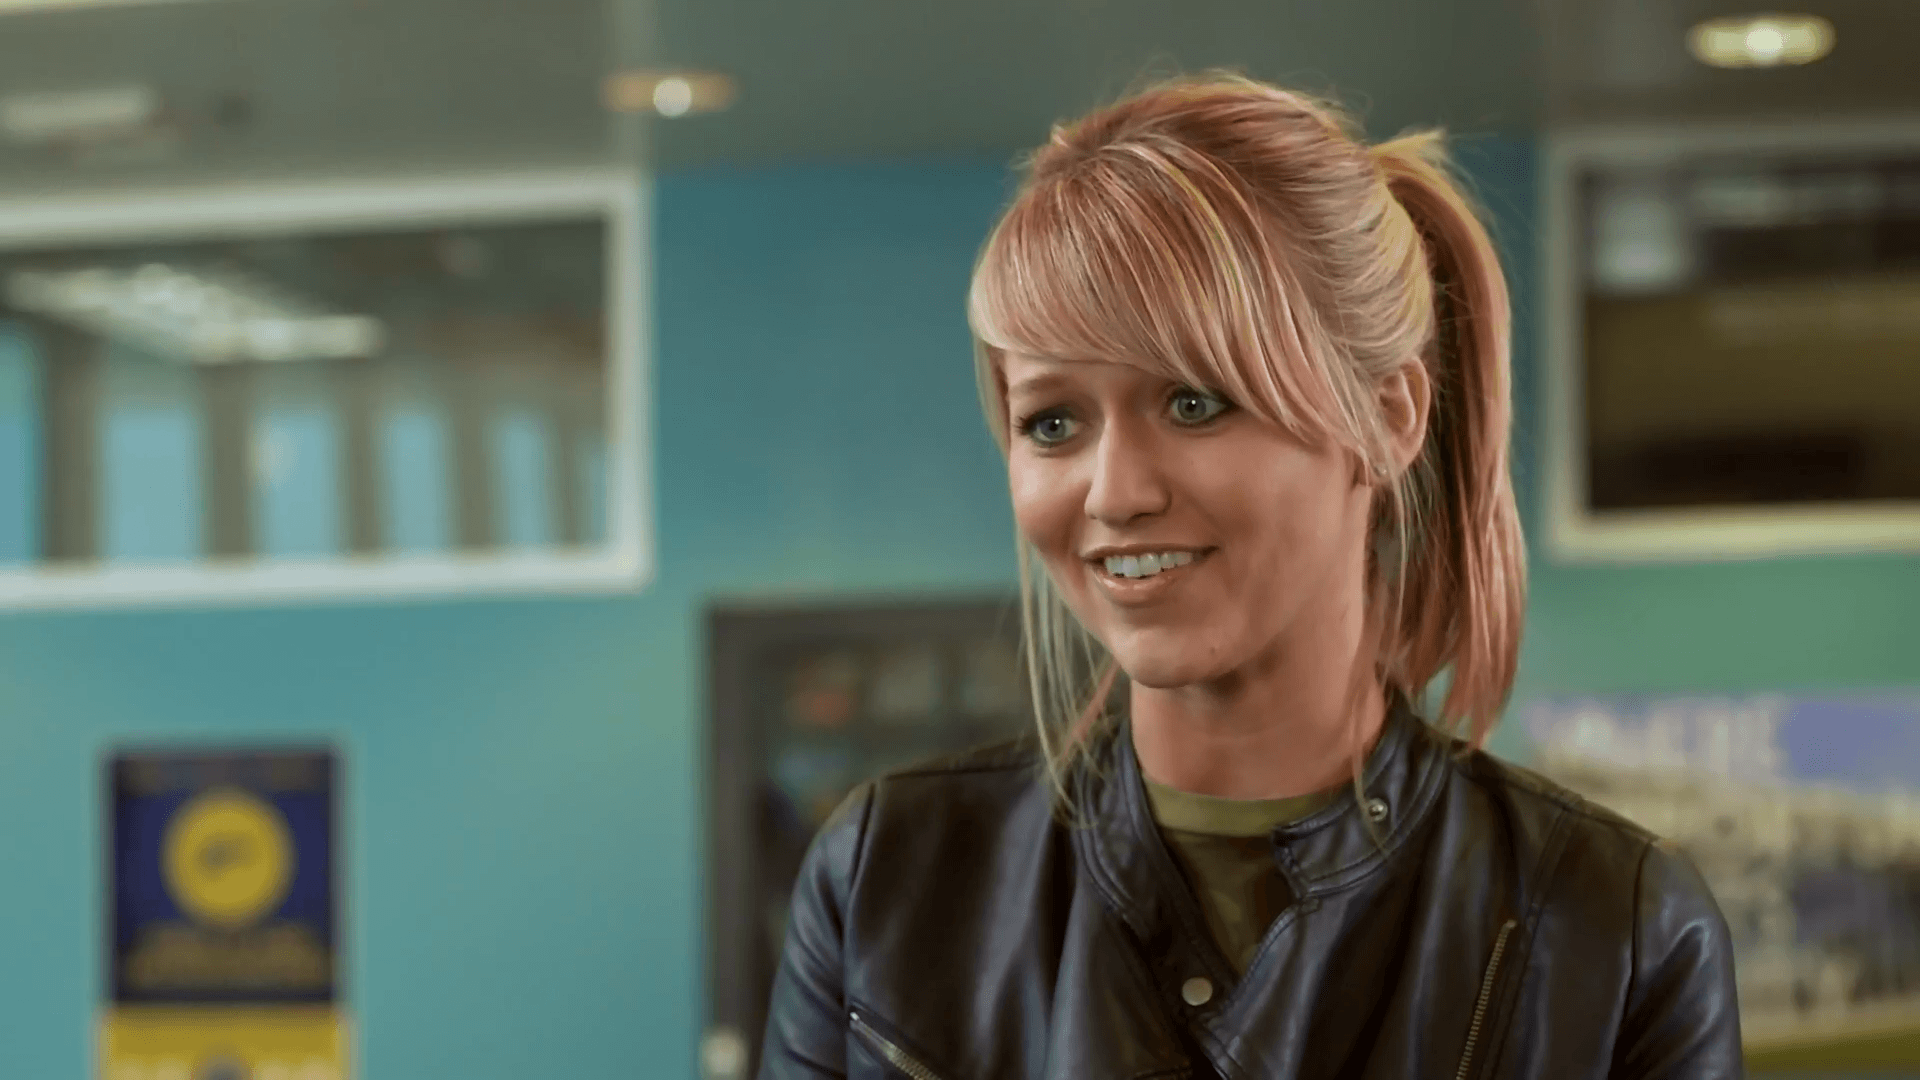 Now this girl, Johanna Braddy, I could definitely see in the new